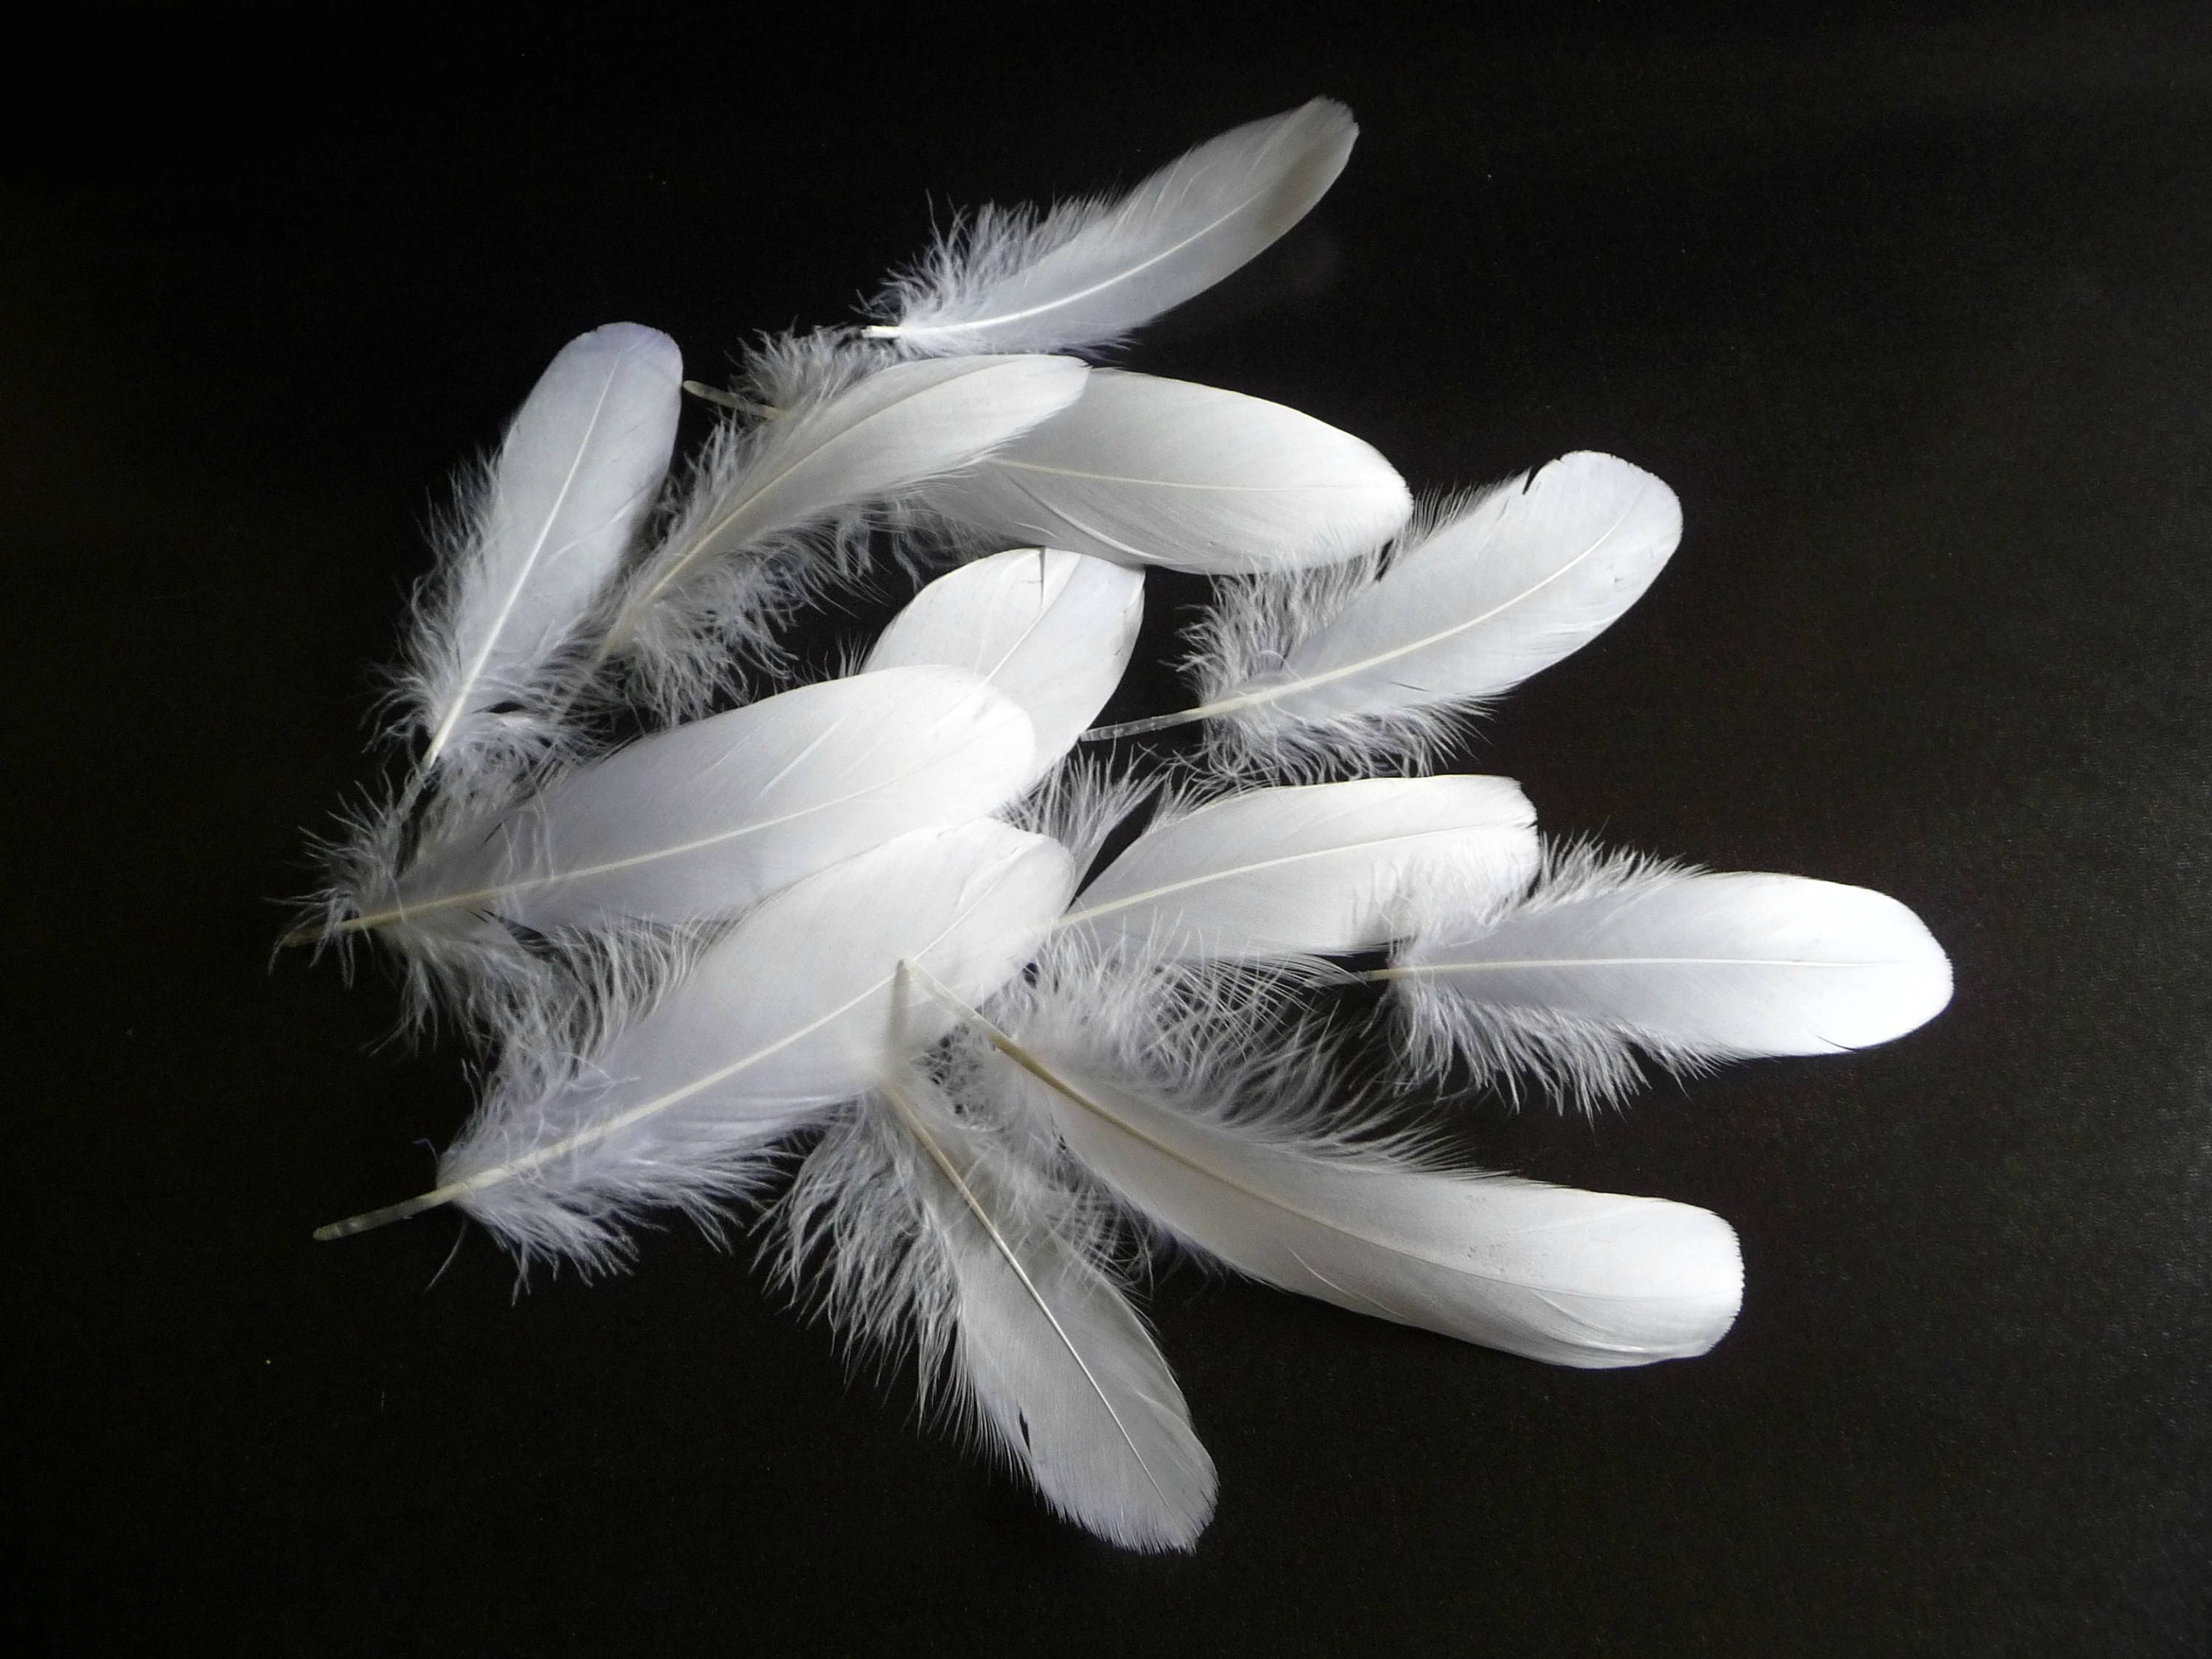 An Elegant, Single Peacock Feather Displayed Against a Pure White